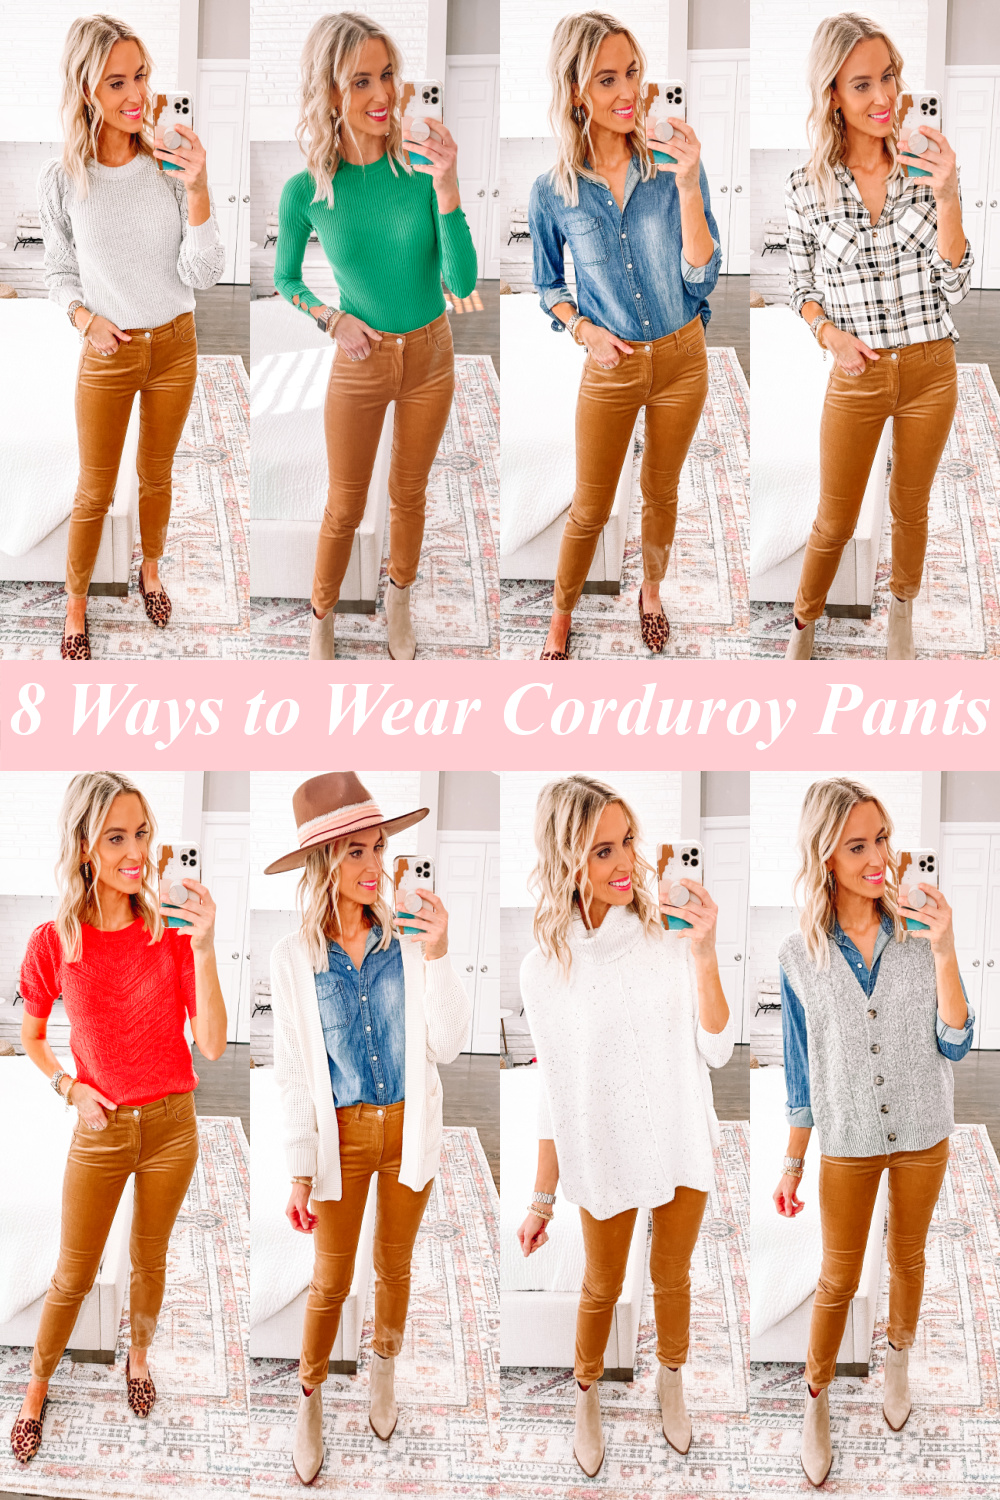 Navy Corduroy Pants Outfits For Women (5 ideas & outfits)